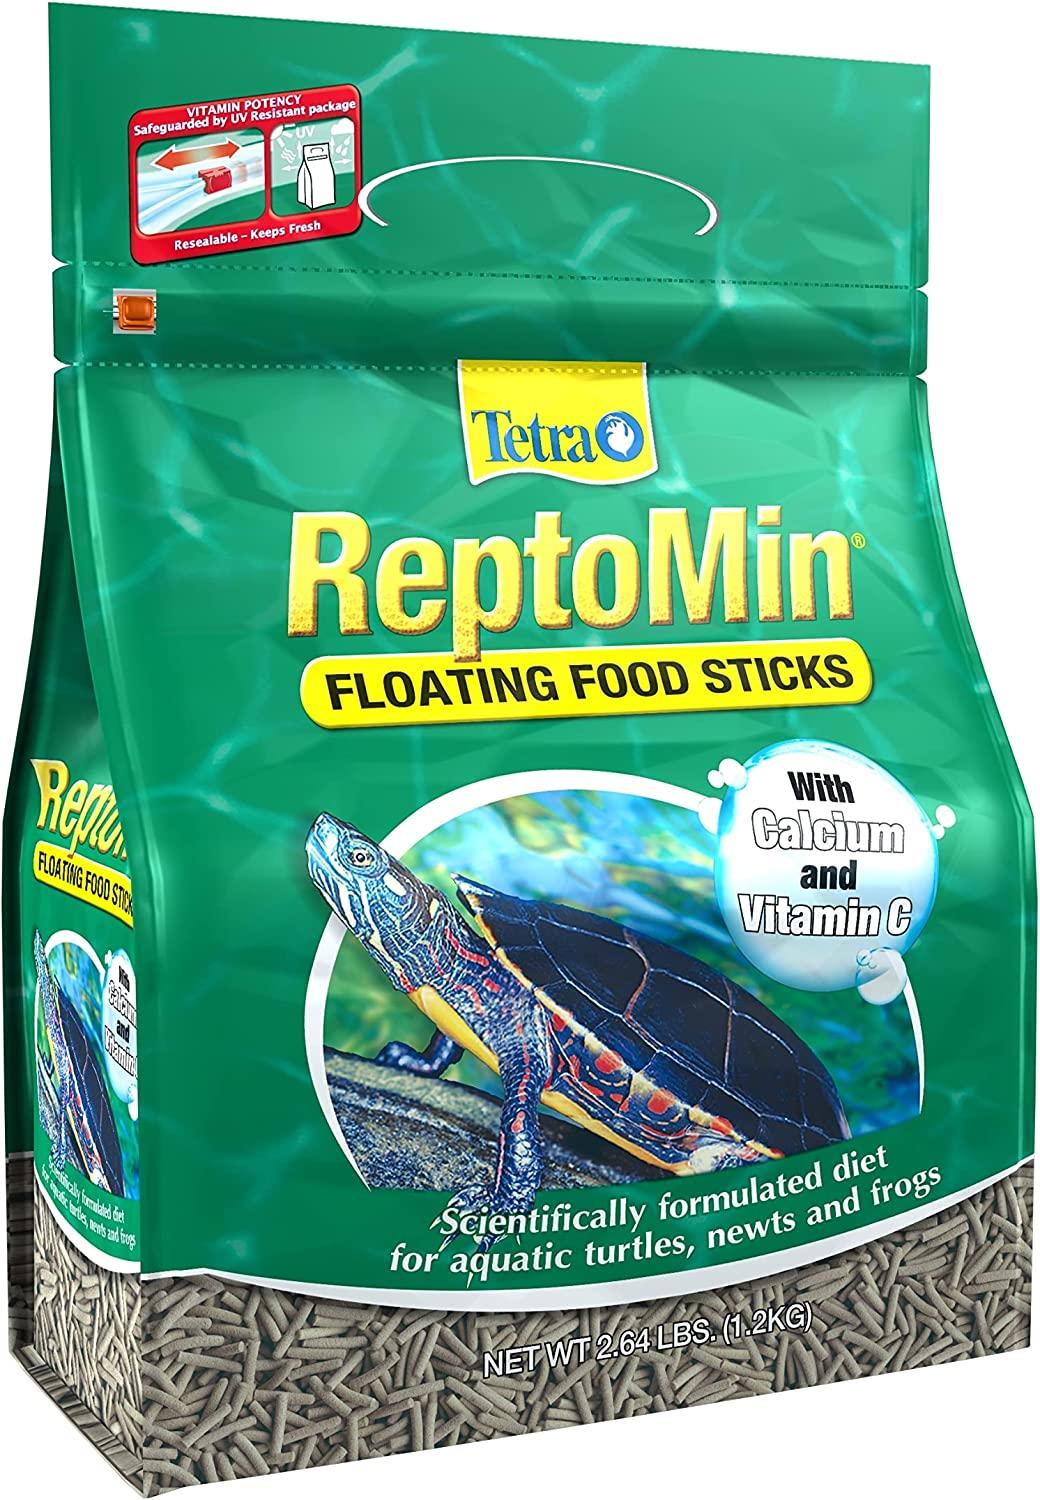 Tetra ReptoMin Floating Food Sticks 2.64 Pounds, For Aquatic Turtles, Newts  And Frogs, green